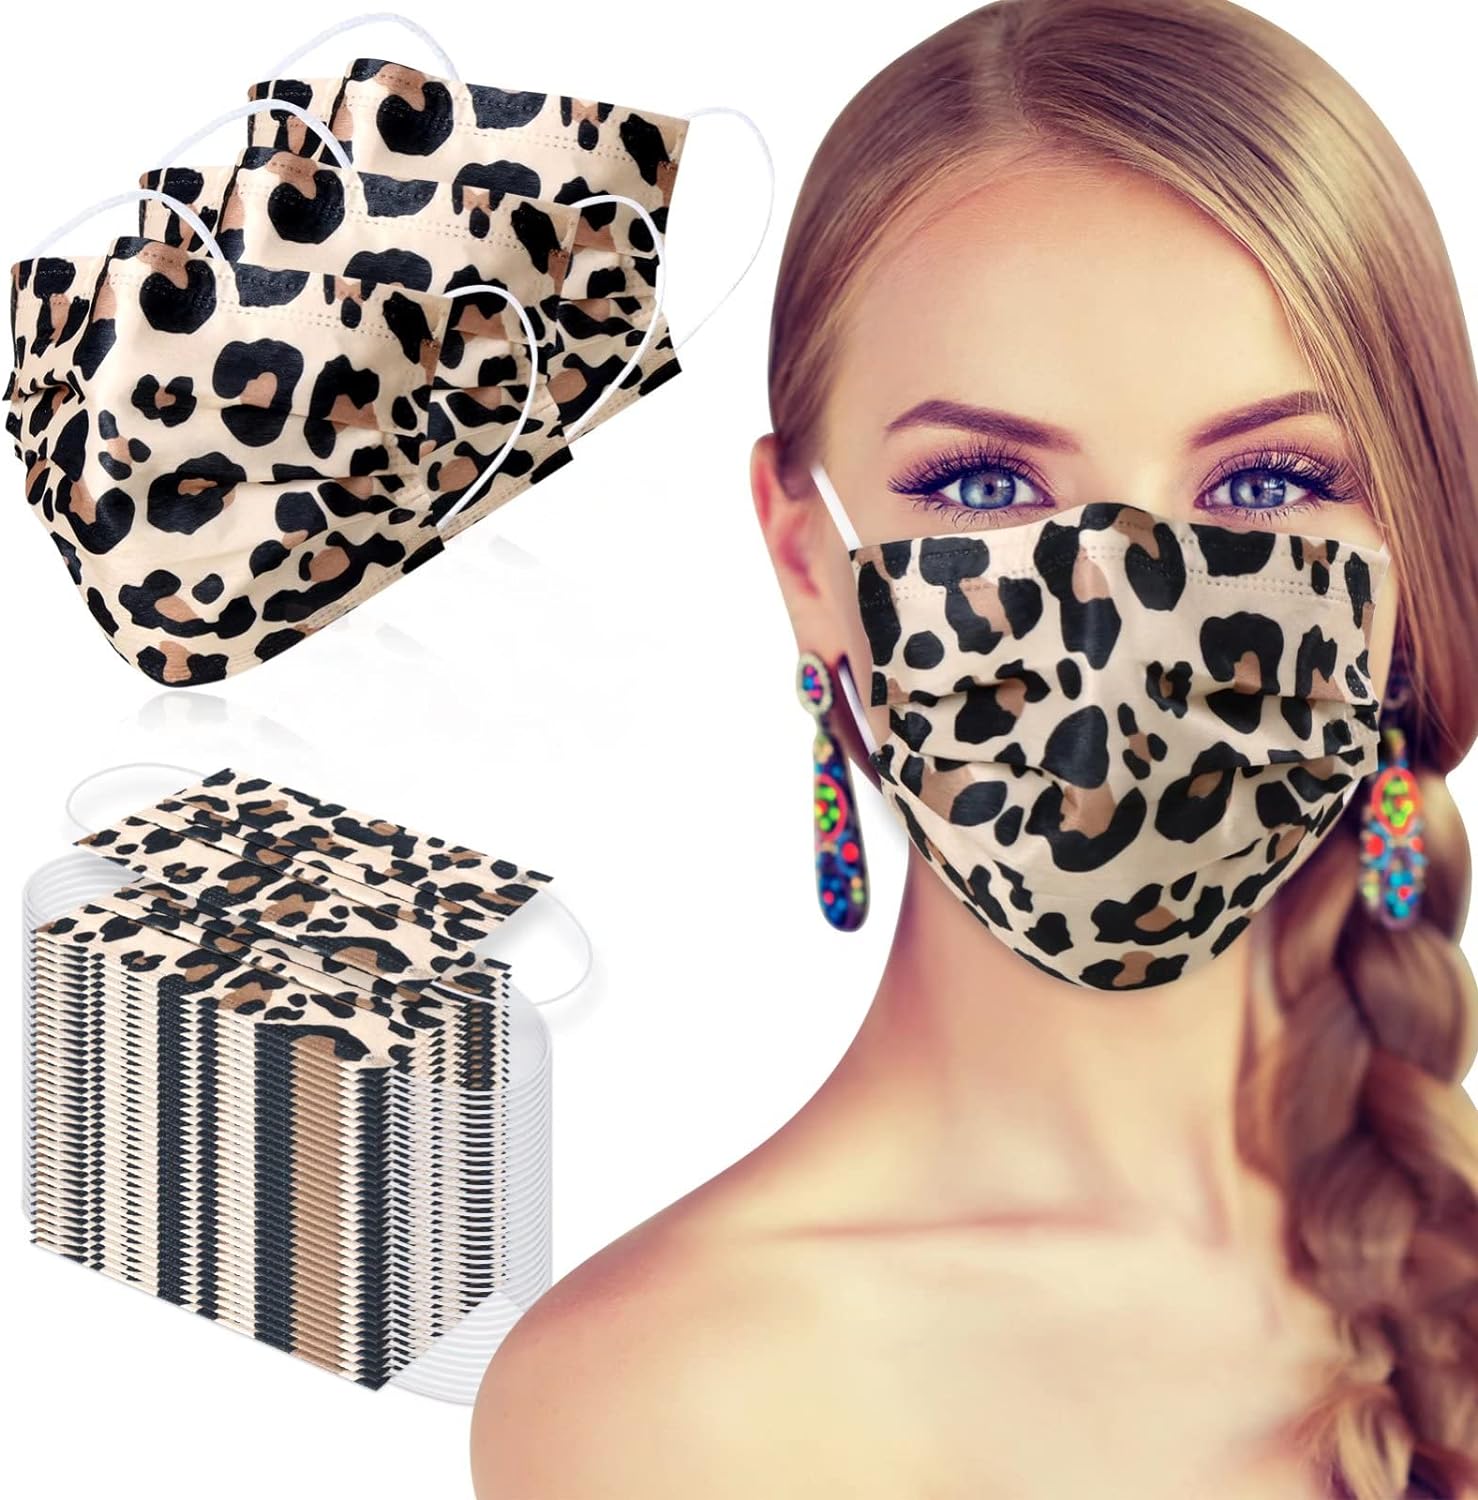 Generic Disposable Face Mask - 50pcs Comfortable Protective Mouth Cover,Printed Cheetah Face Mask Adults, 3-Ply Breathable Safety Mask